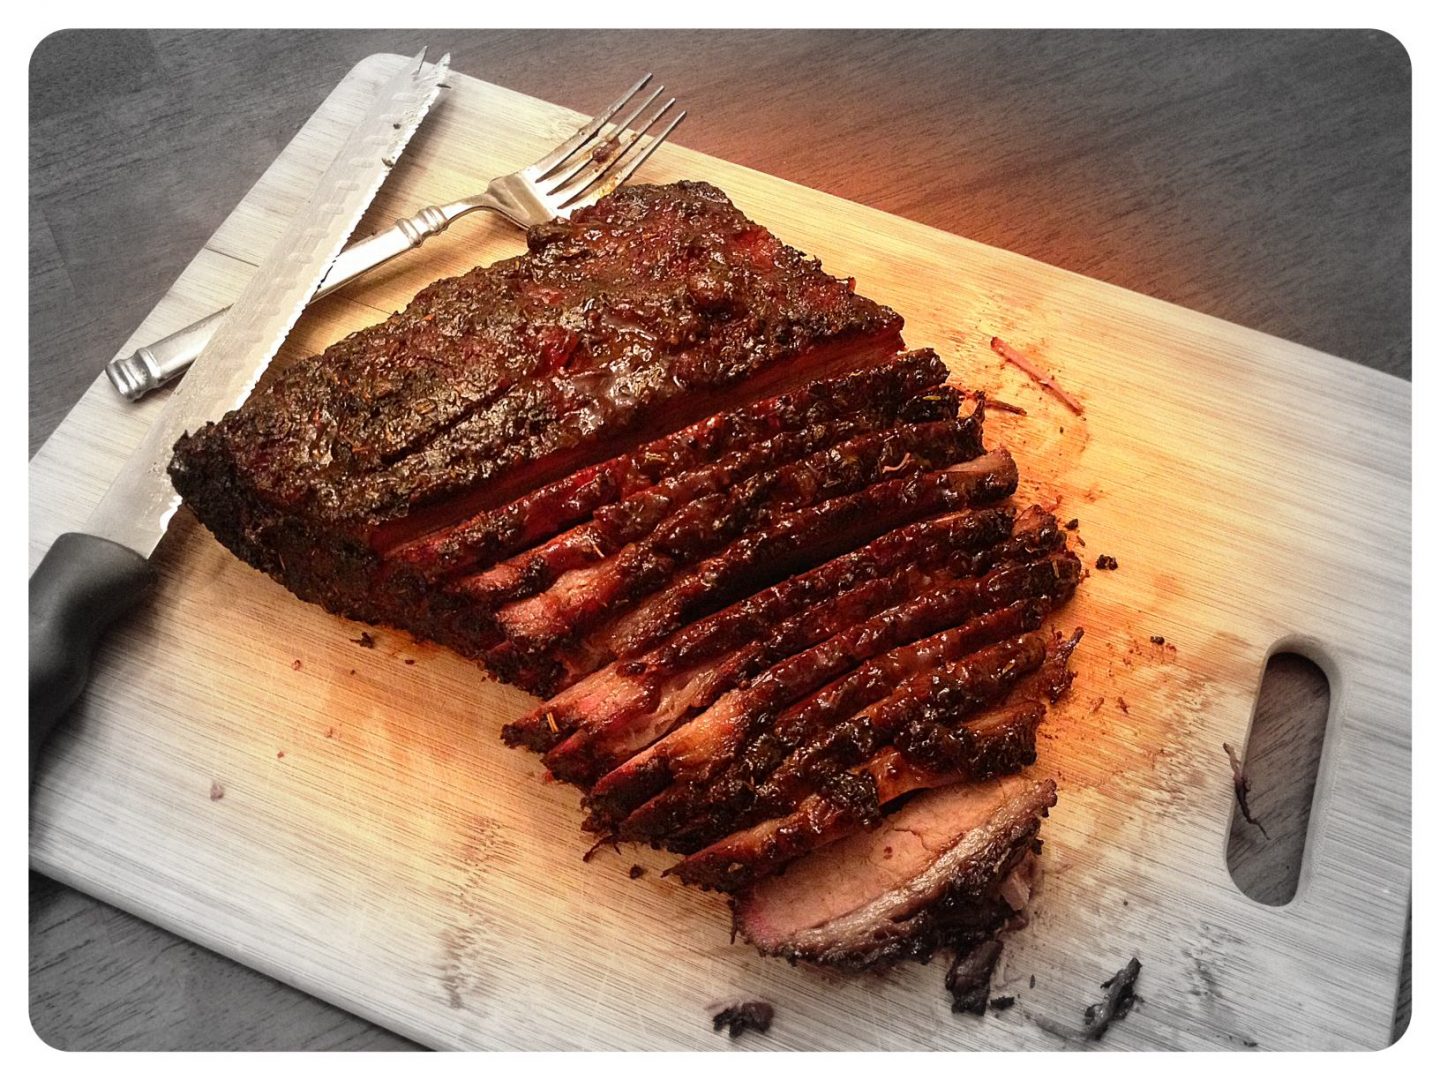 What is the best way to cook beef brisket on the grill?